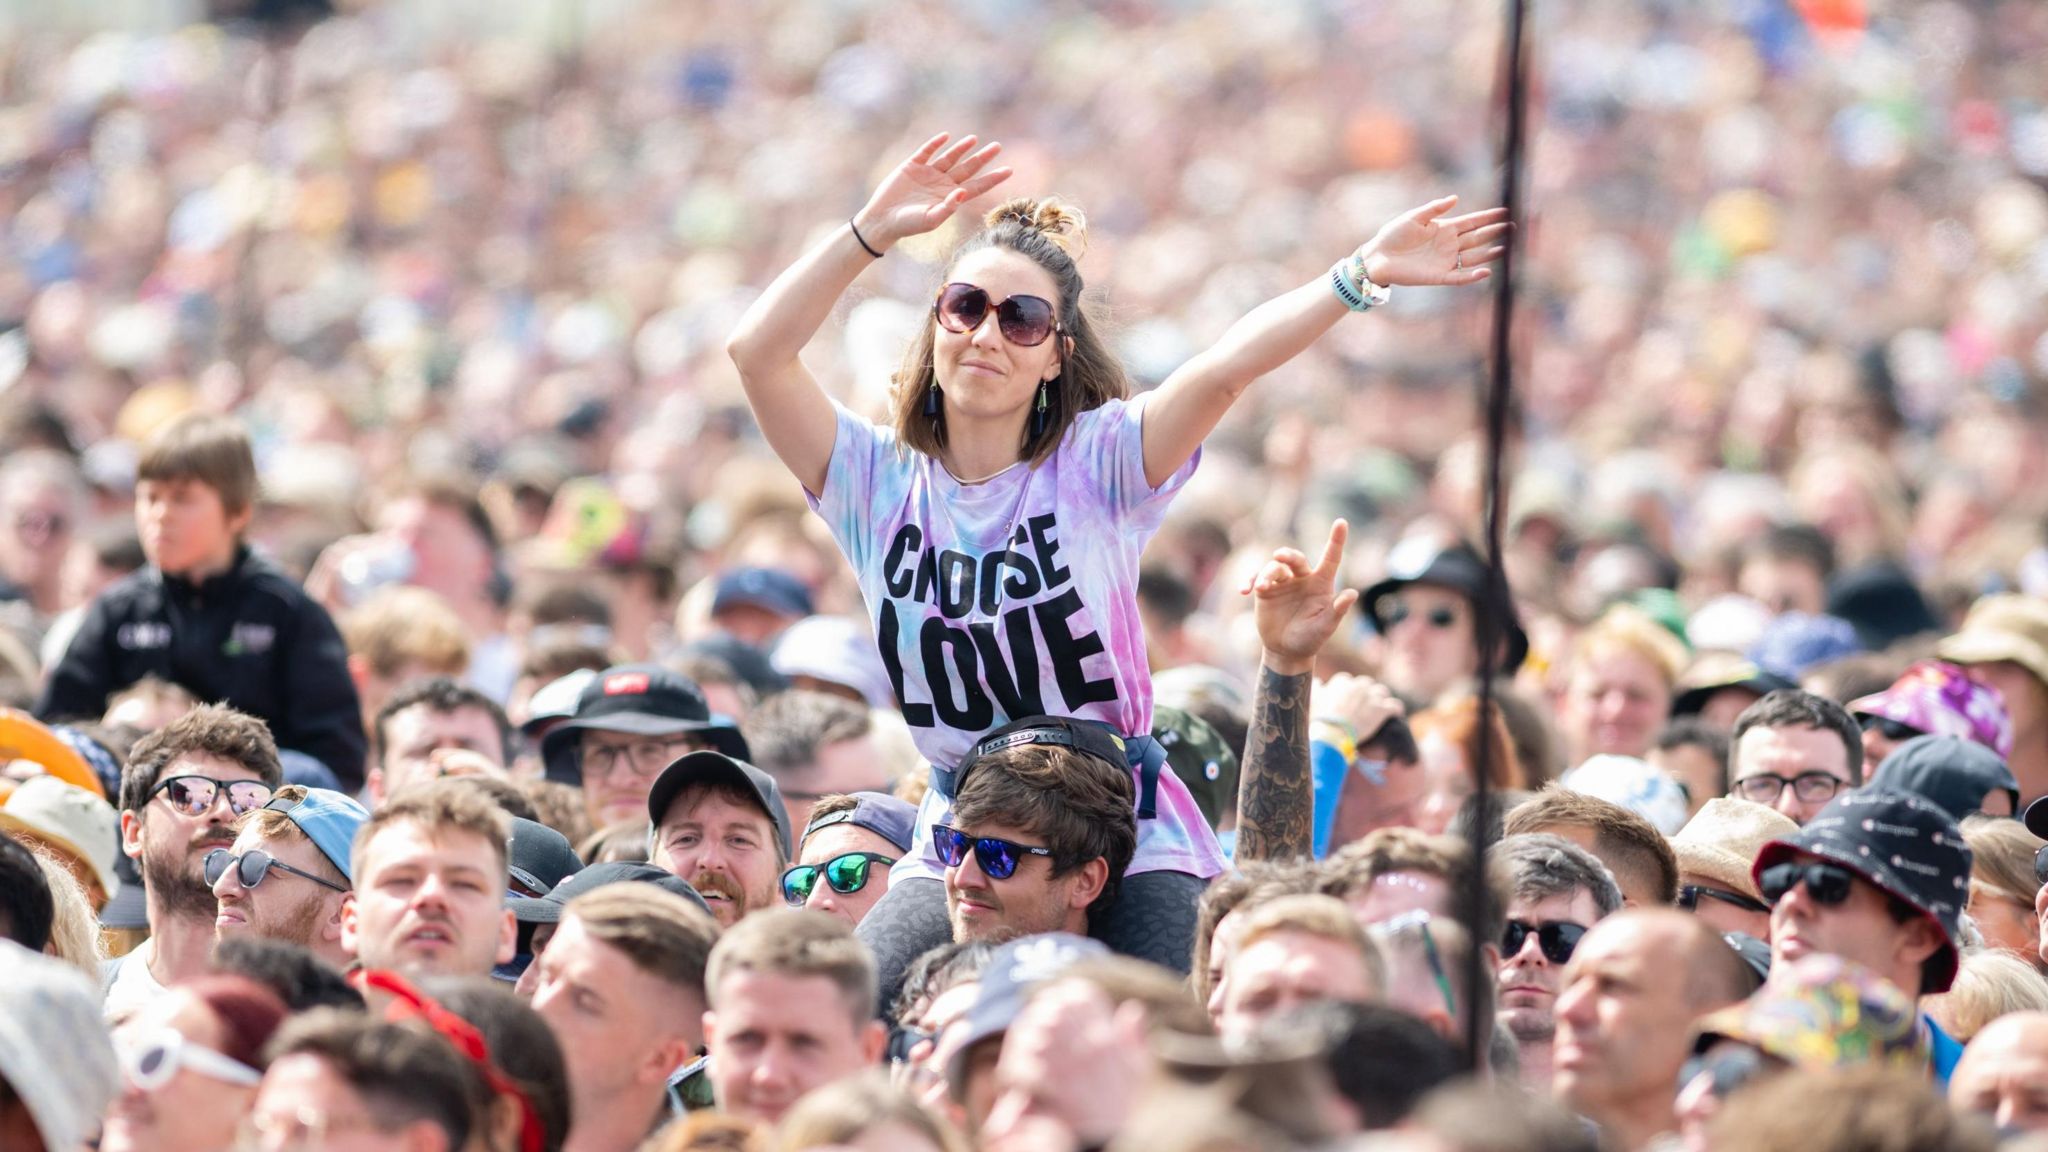 A woman in the crowd dancing at Glastonbury